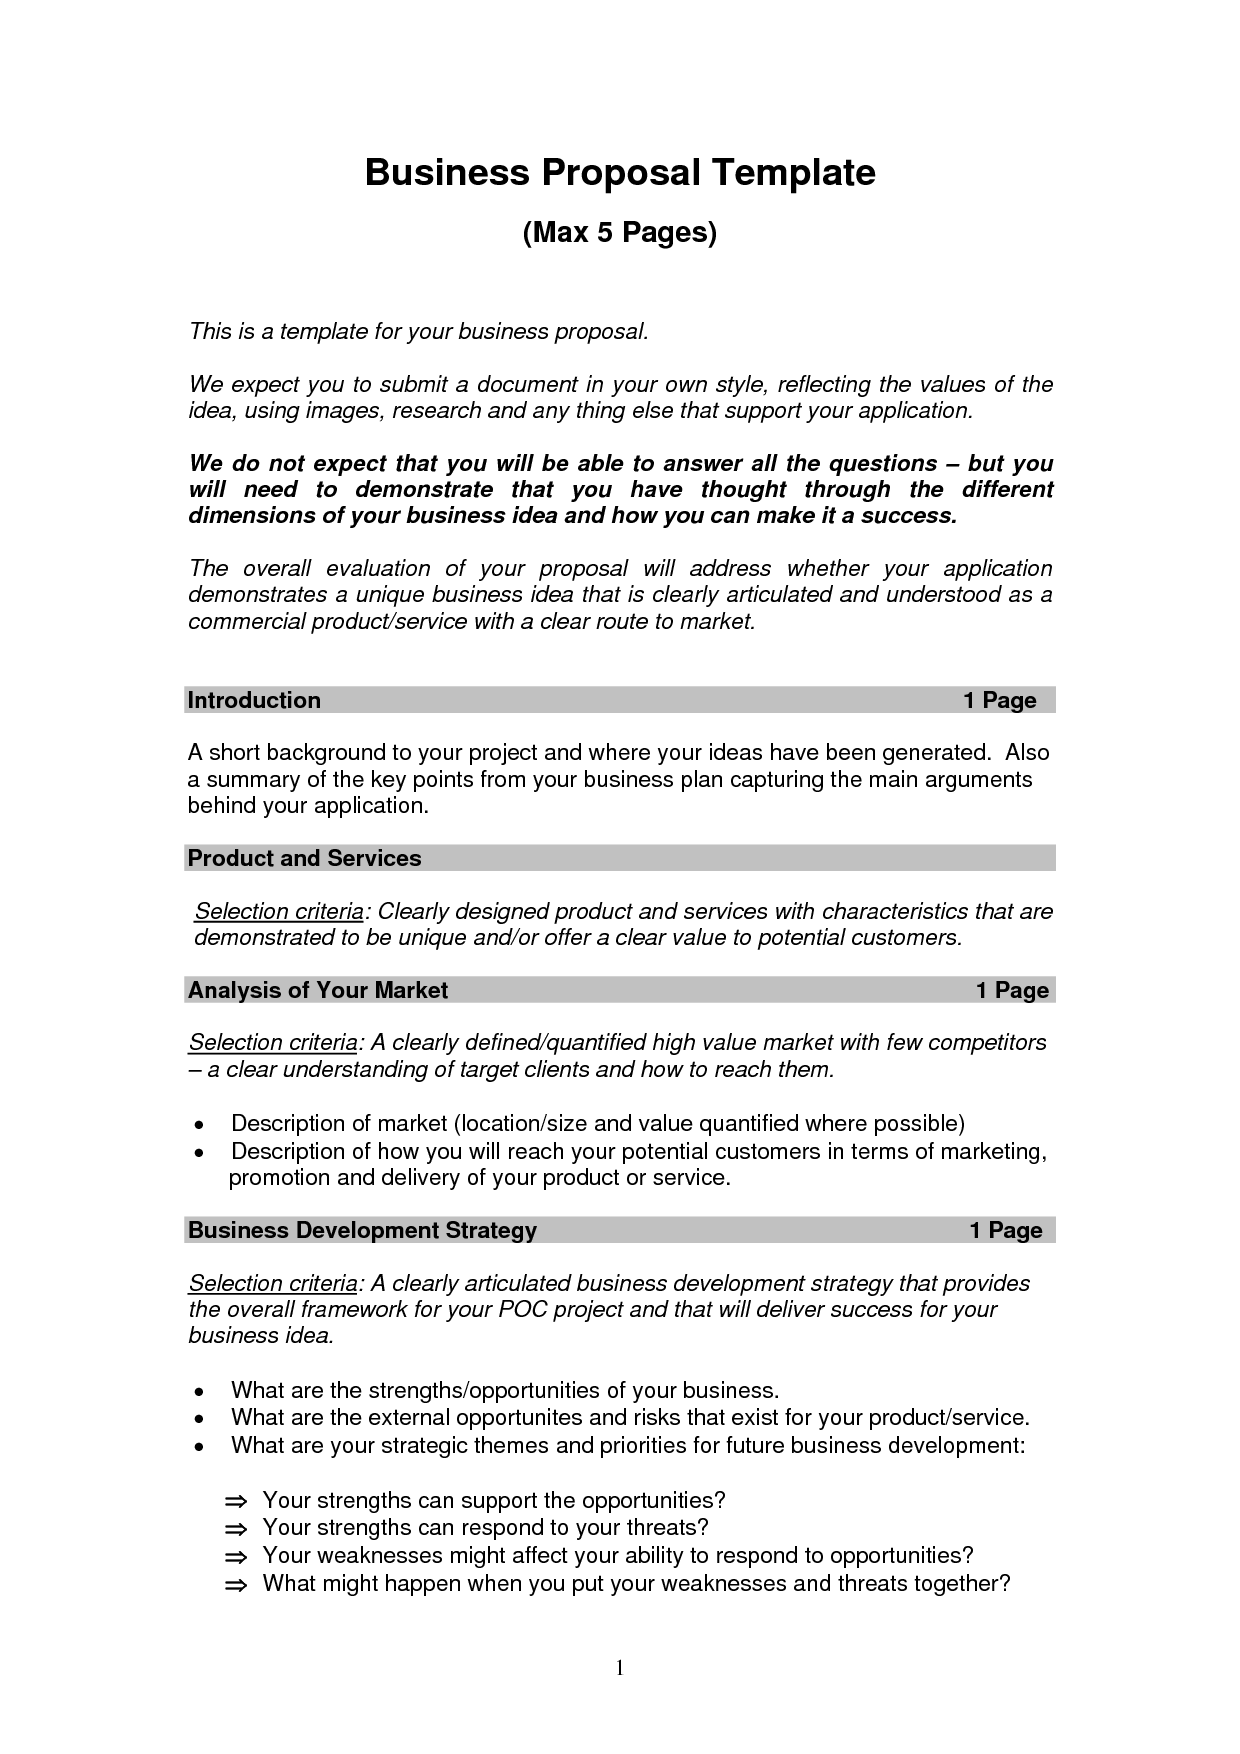 Examples of dissertation proposals uk